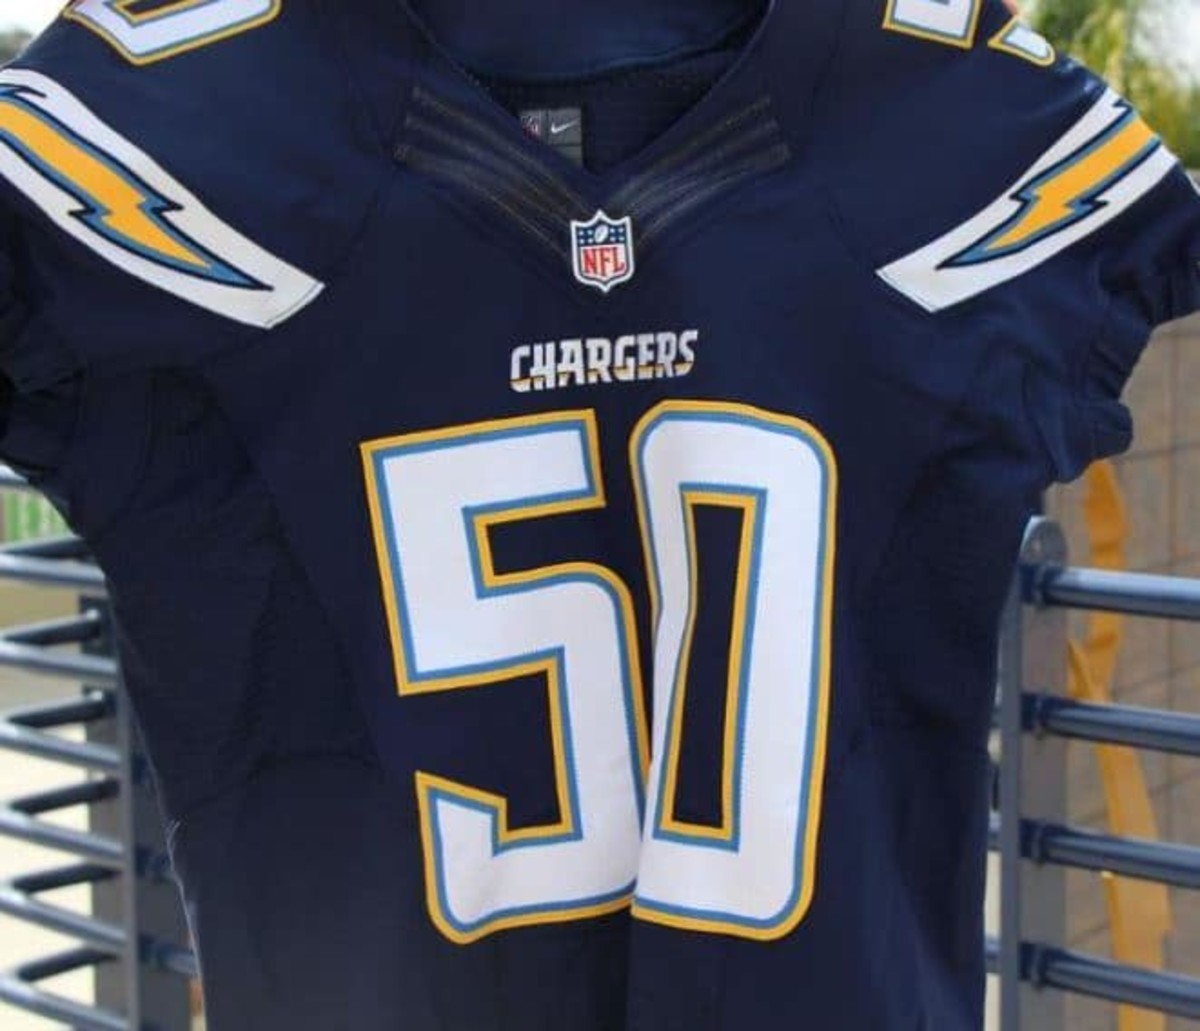 The Chargers declared their uniforms perfect, then changed them -  Footballscoop